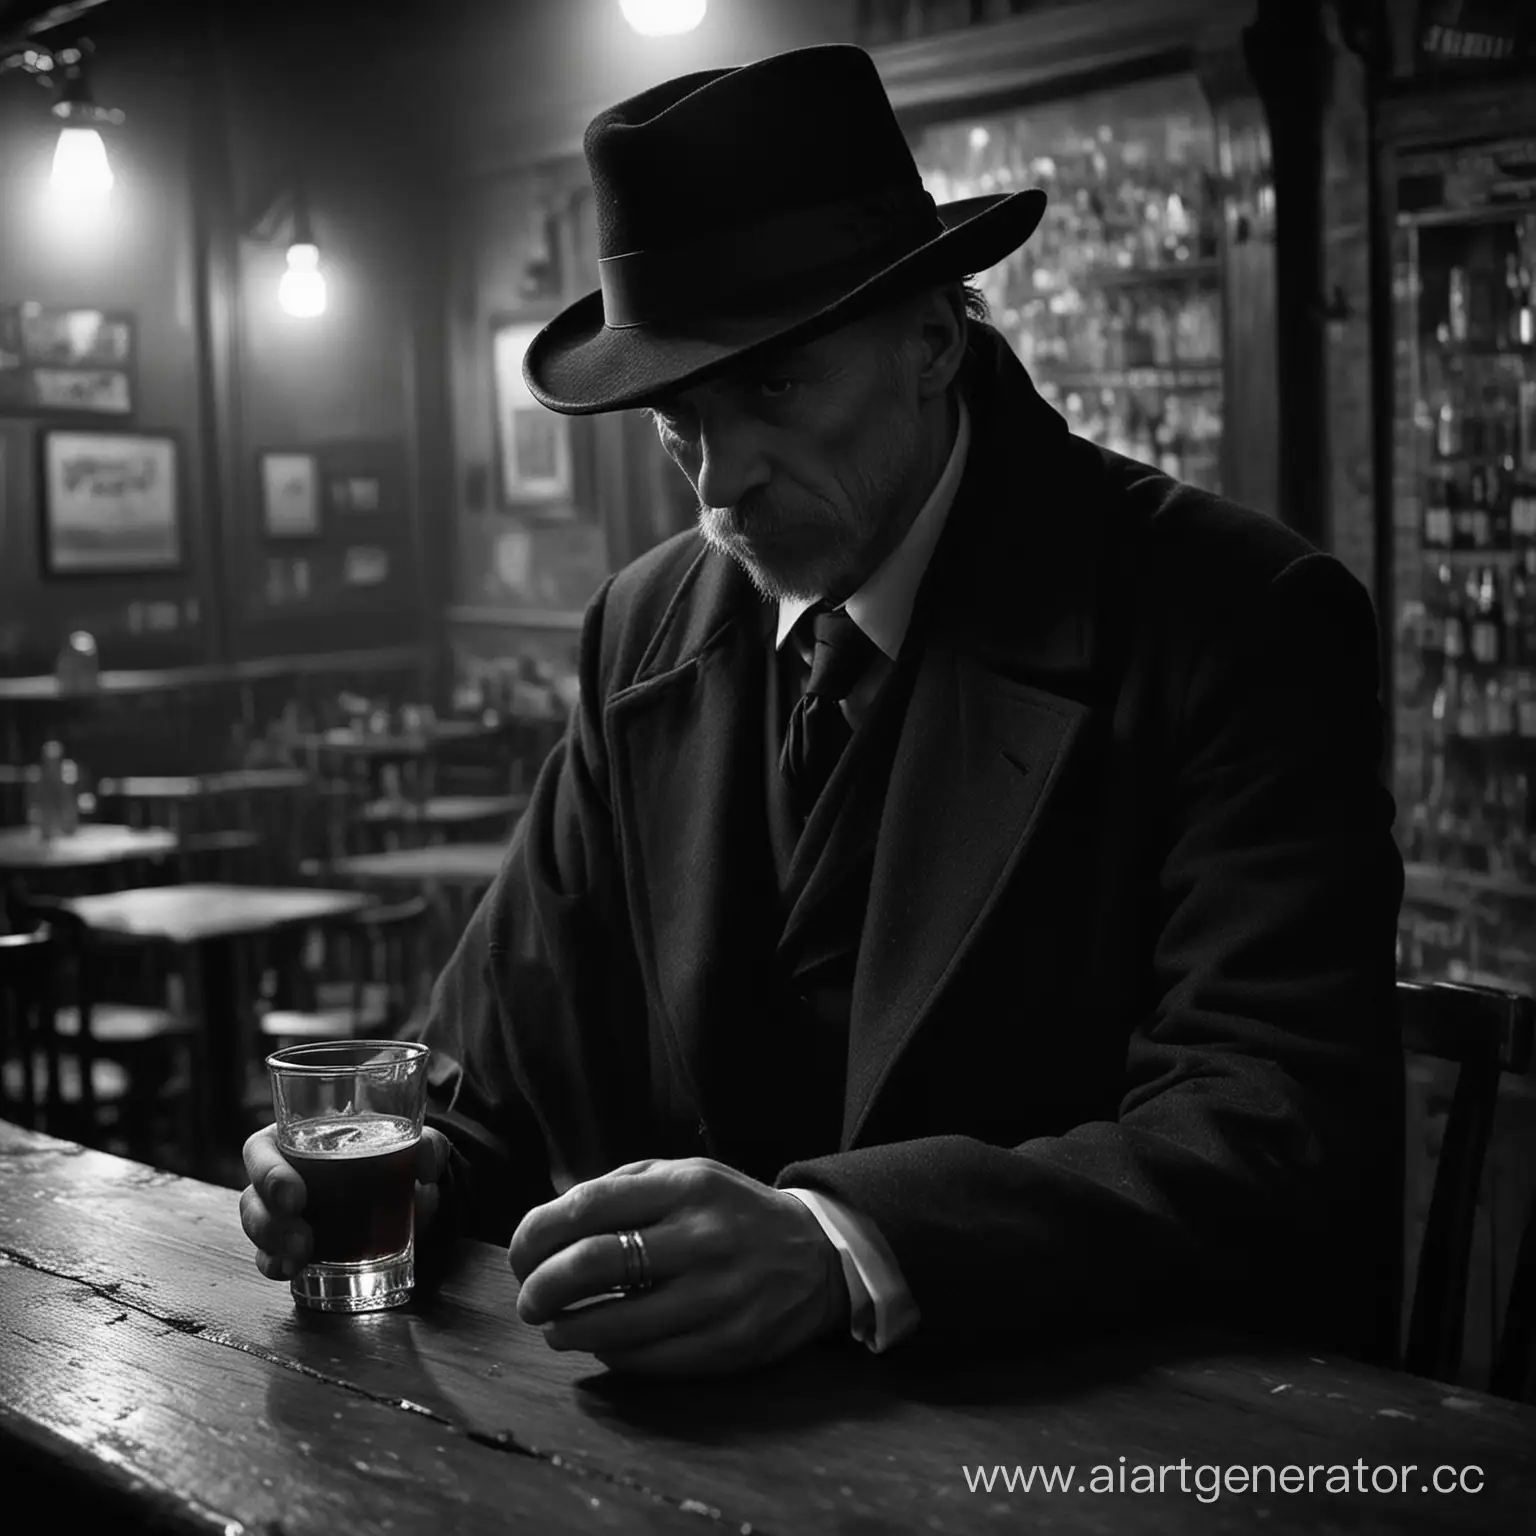 Mysterious-Stranger-in-a-Gloomy-Bar-with-Determined-Aura